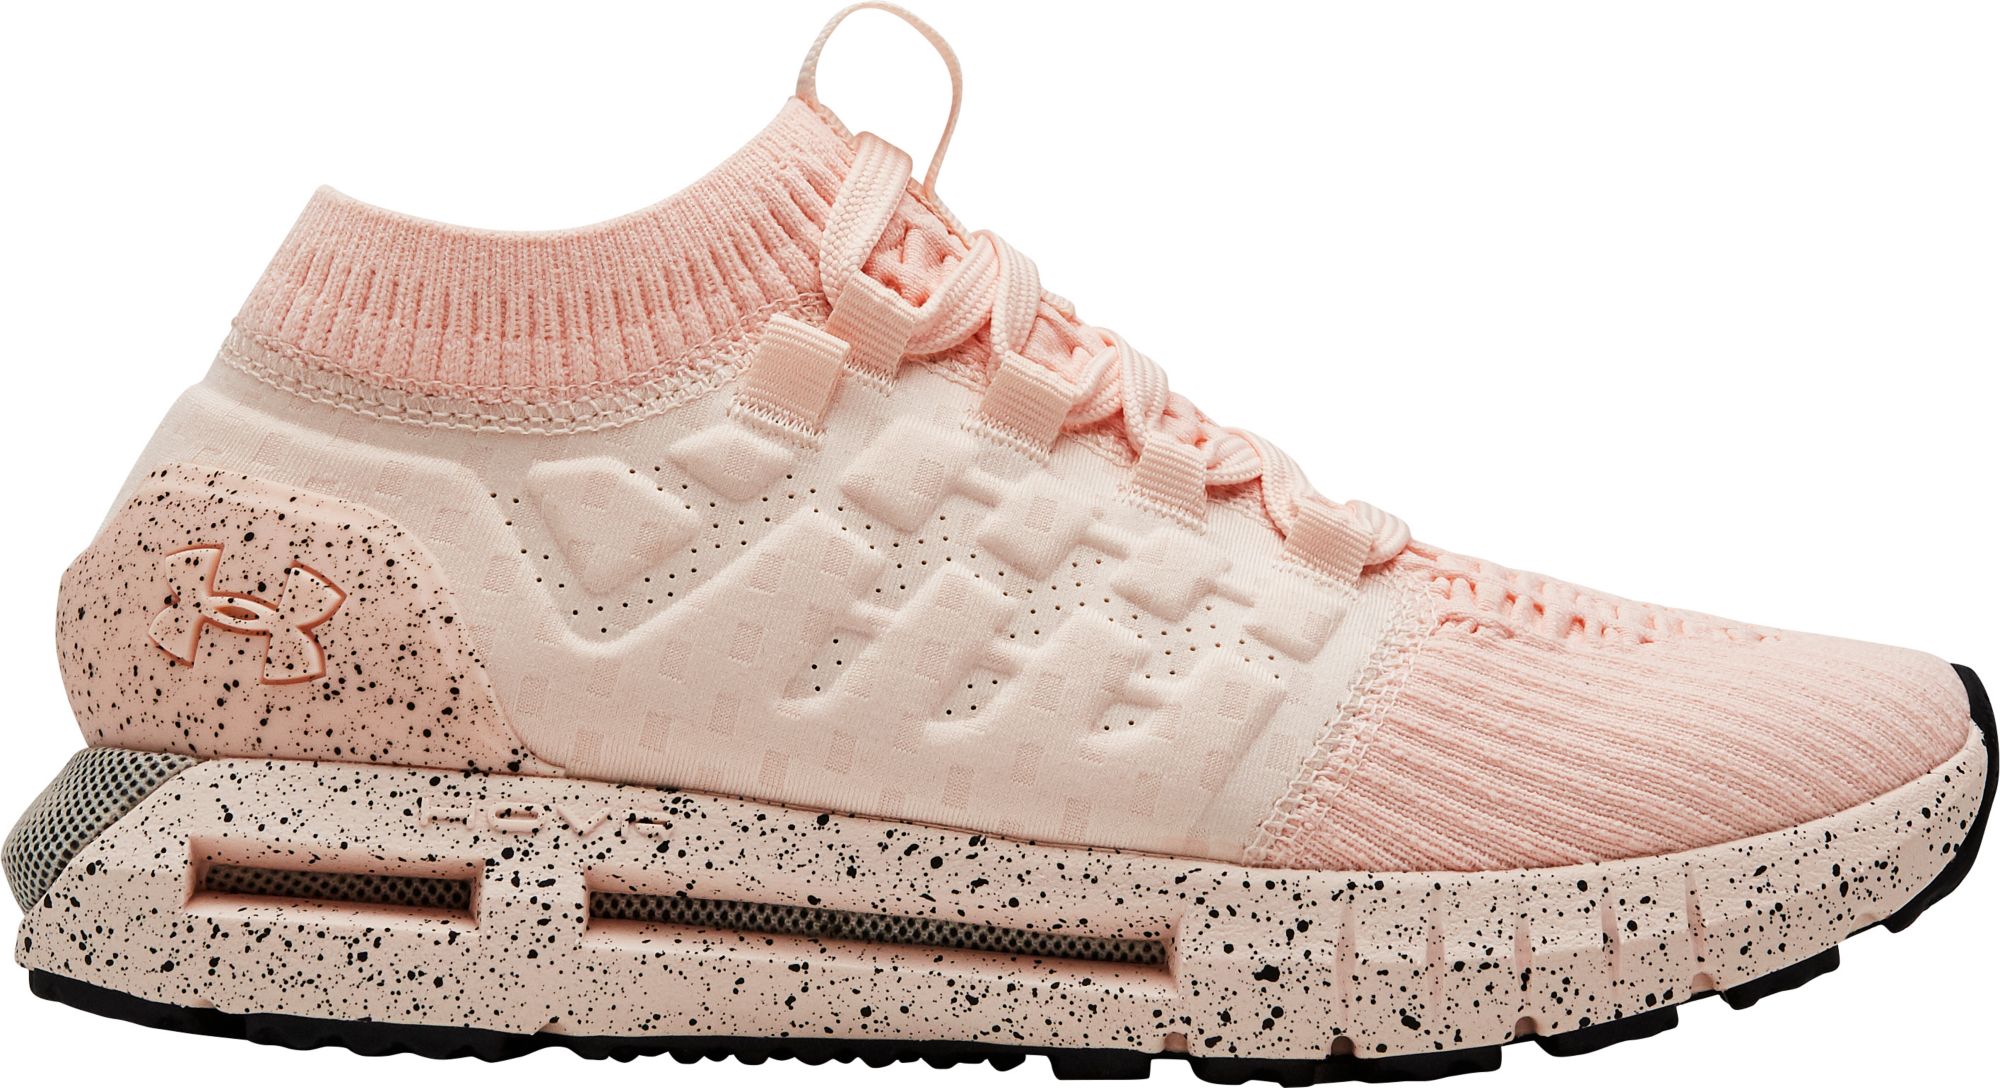 under armour womens pink shoes